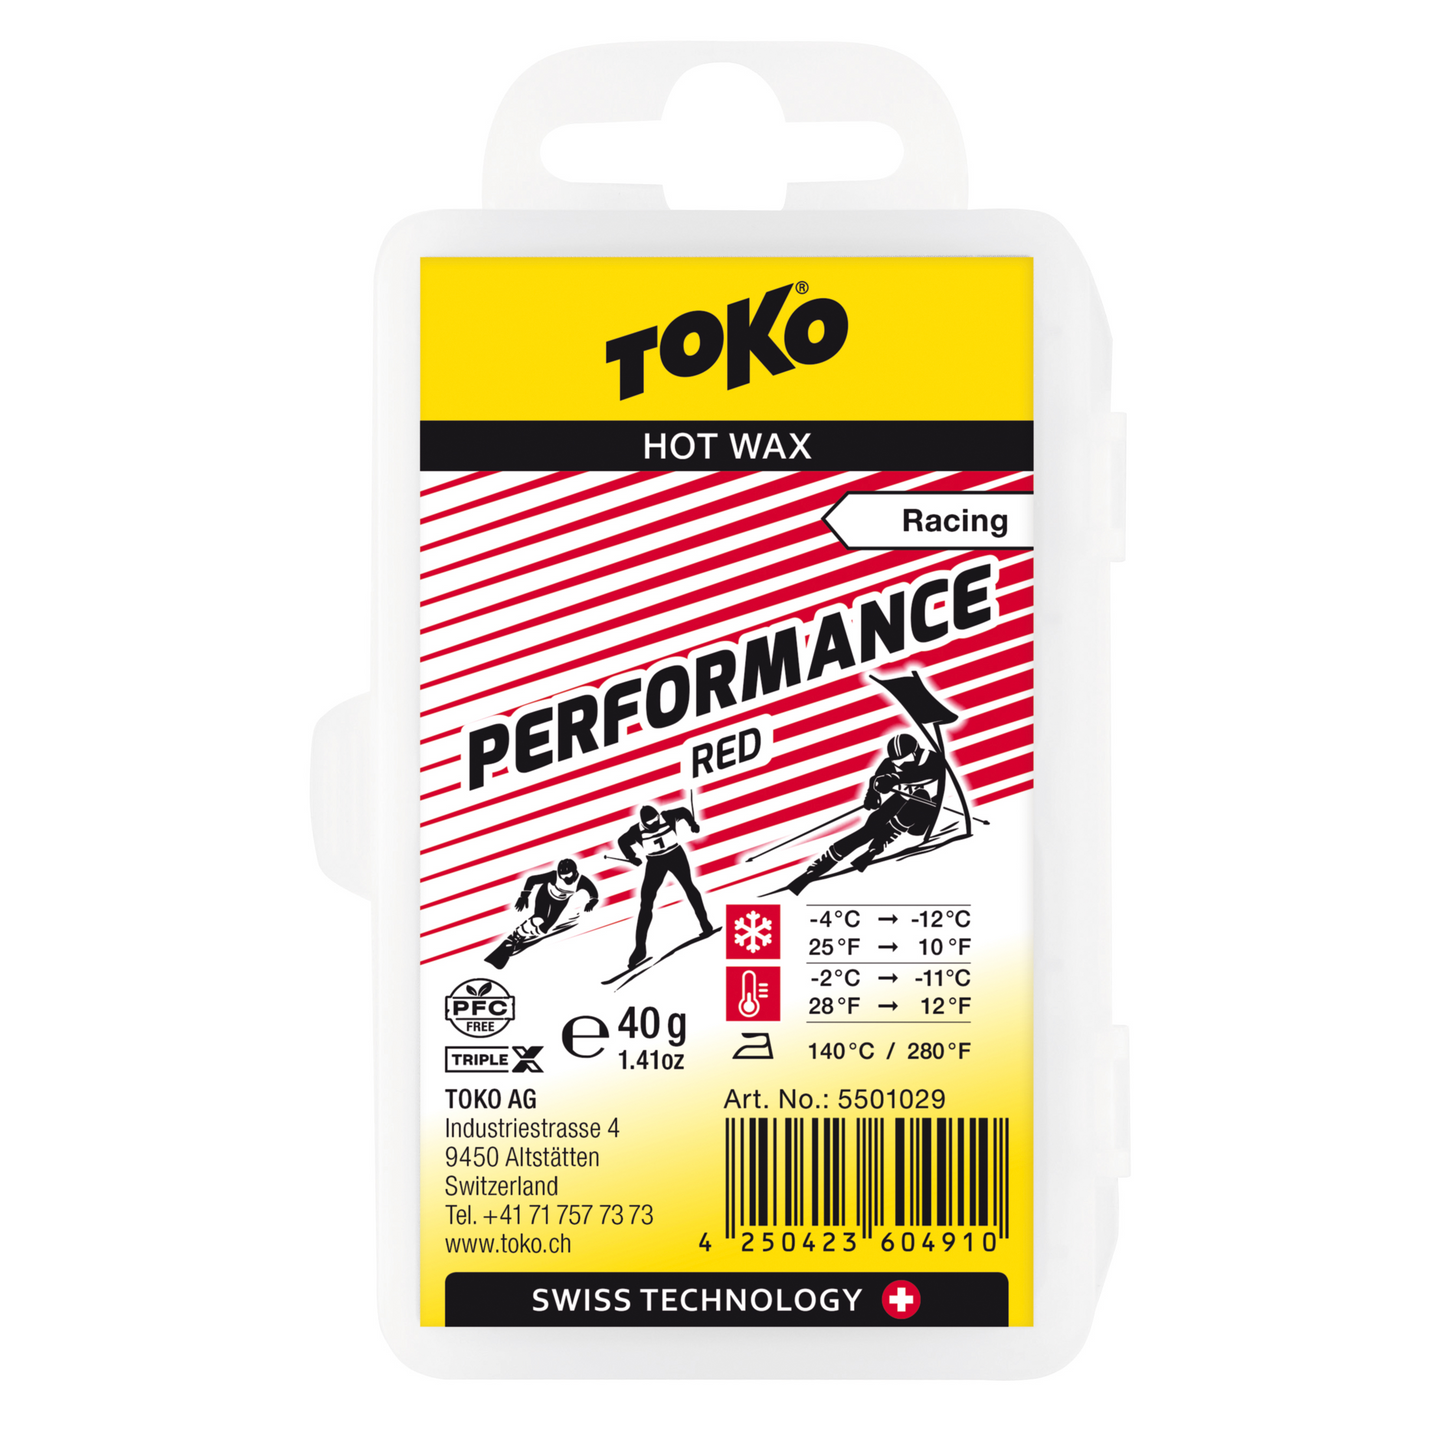 A product picture of the Toko Performance Red Paraffin Melt Wax